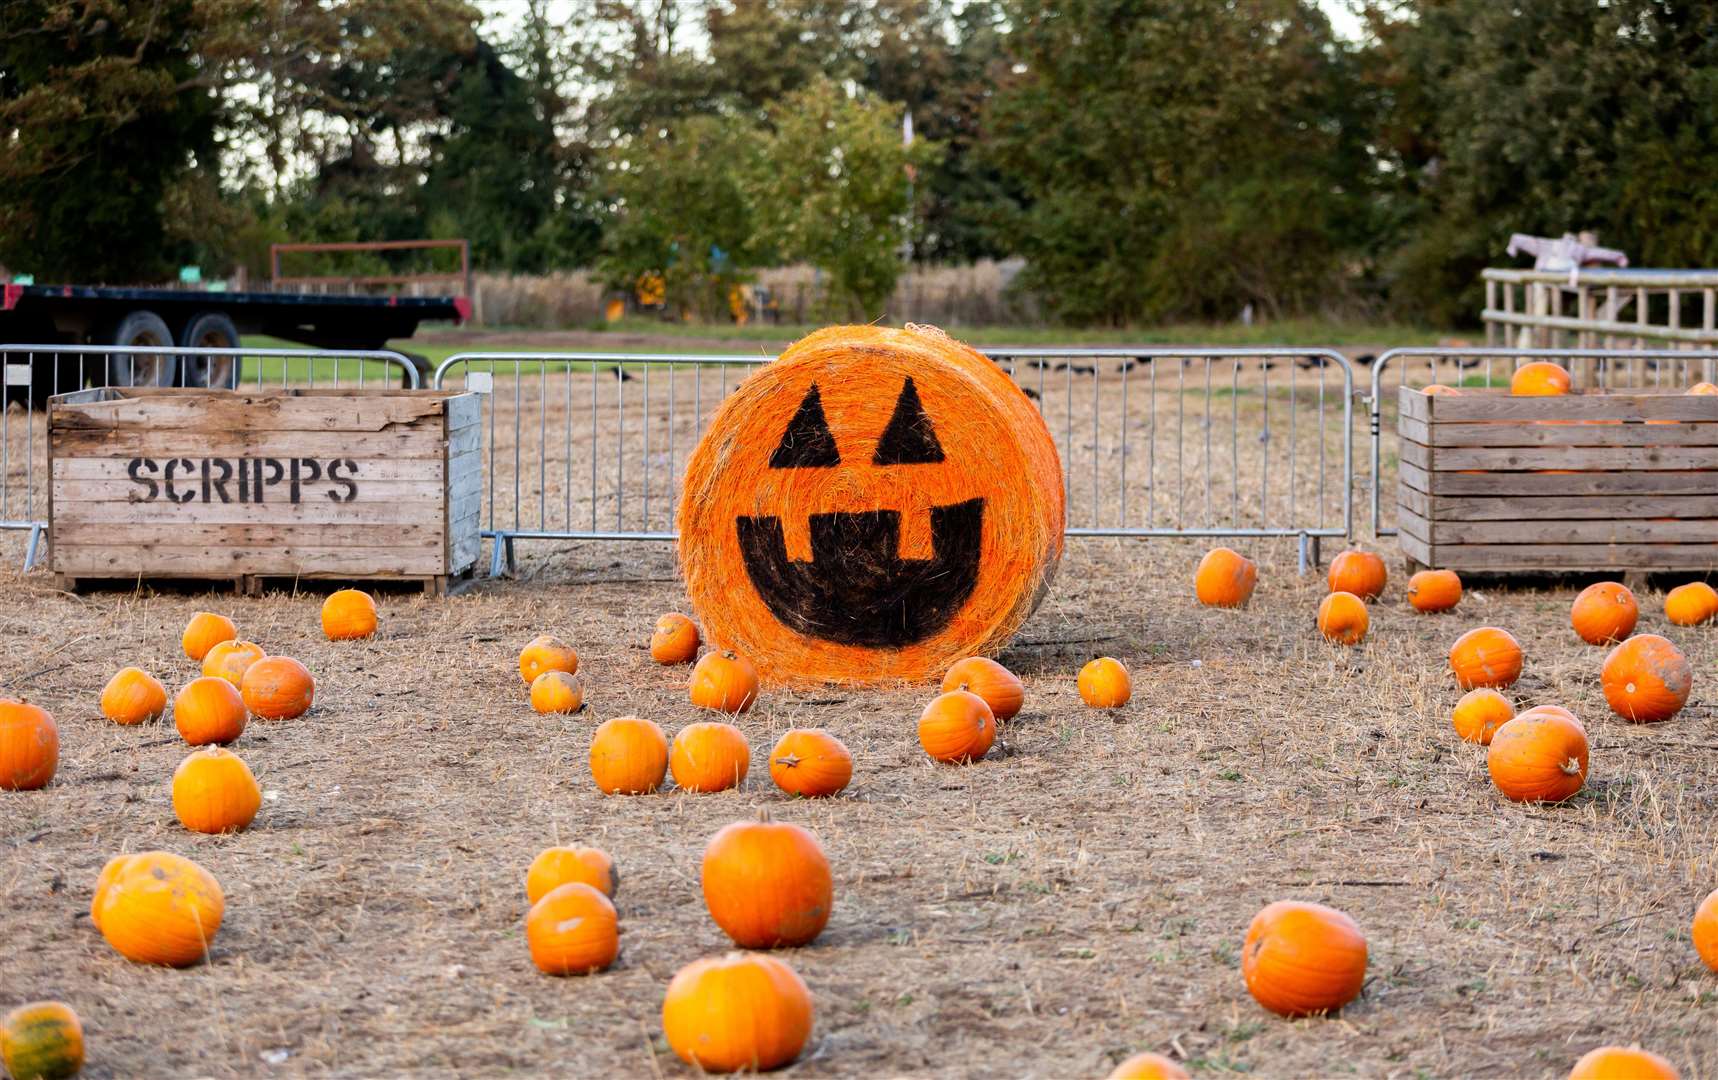 The Bewitched Pumpkin Picking Patch at Quex Activity Centre in Birchington